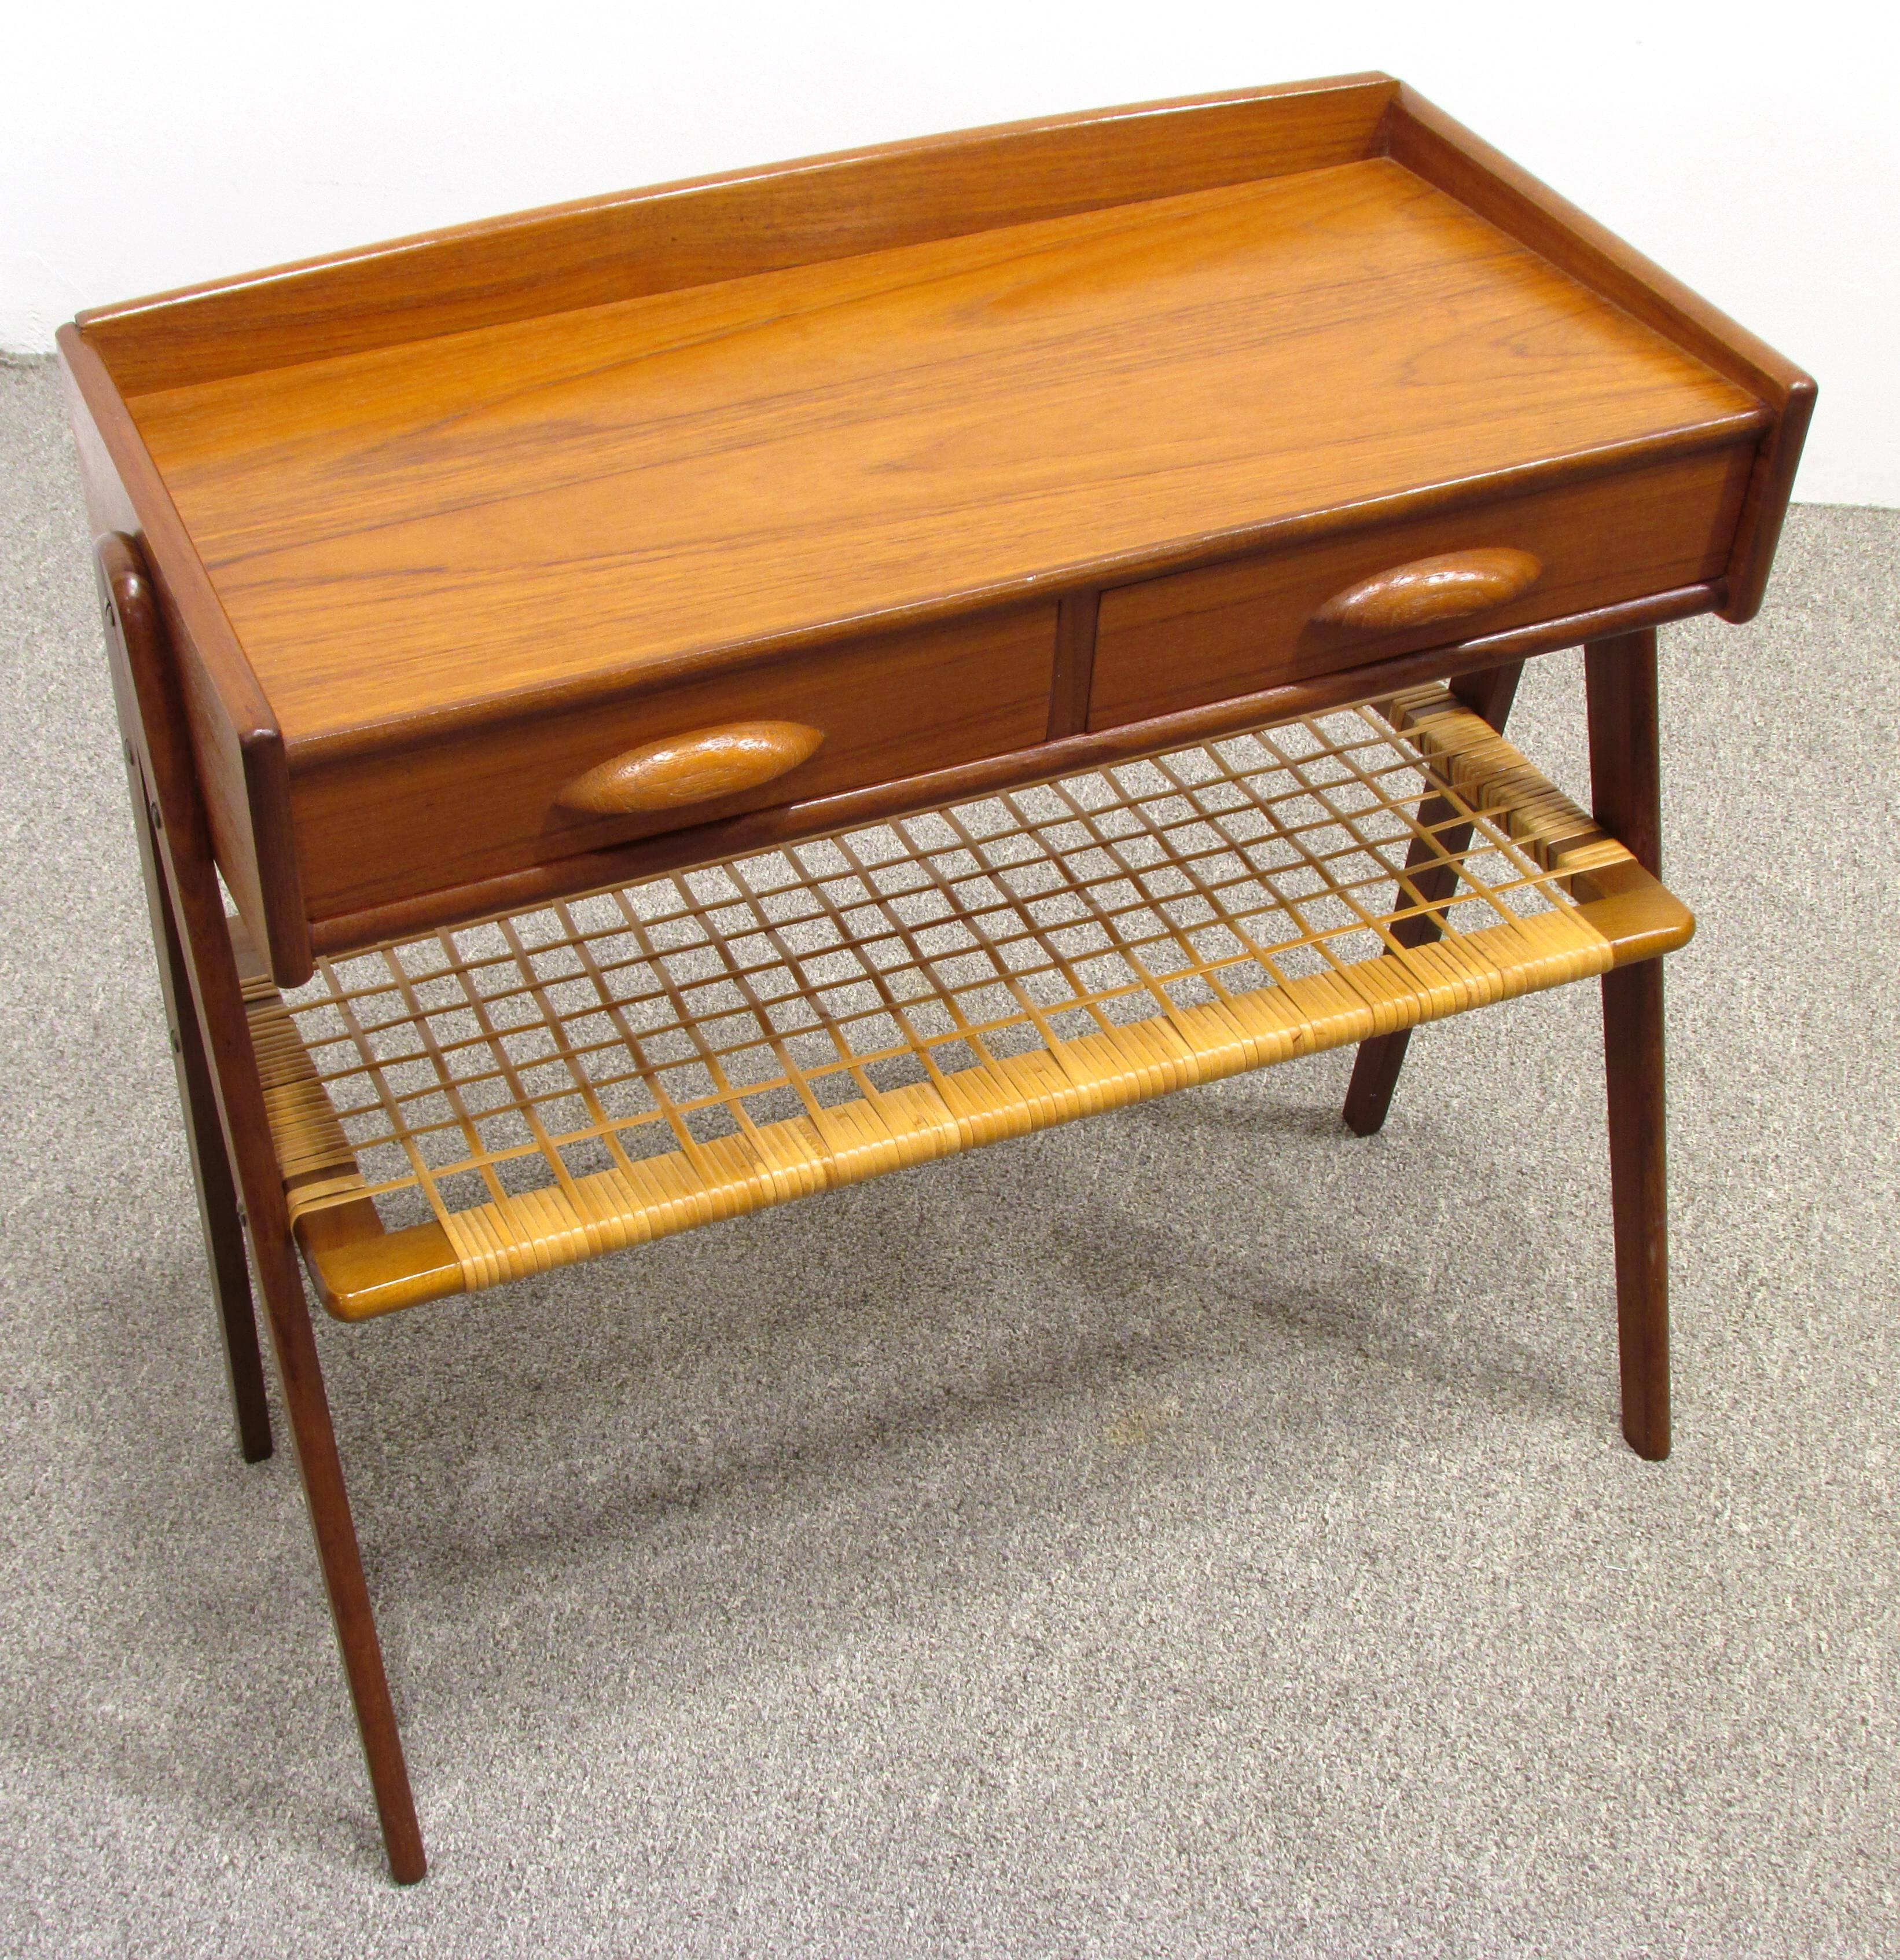 Small scissor leg teak hall table with two drawers and wicker wrapped shelf.